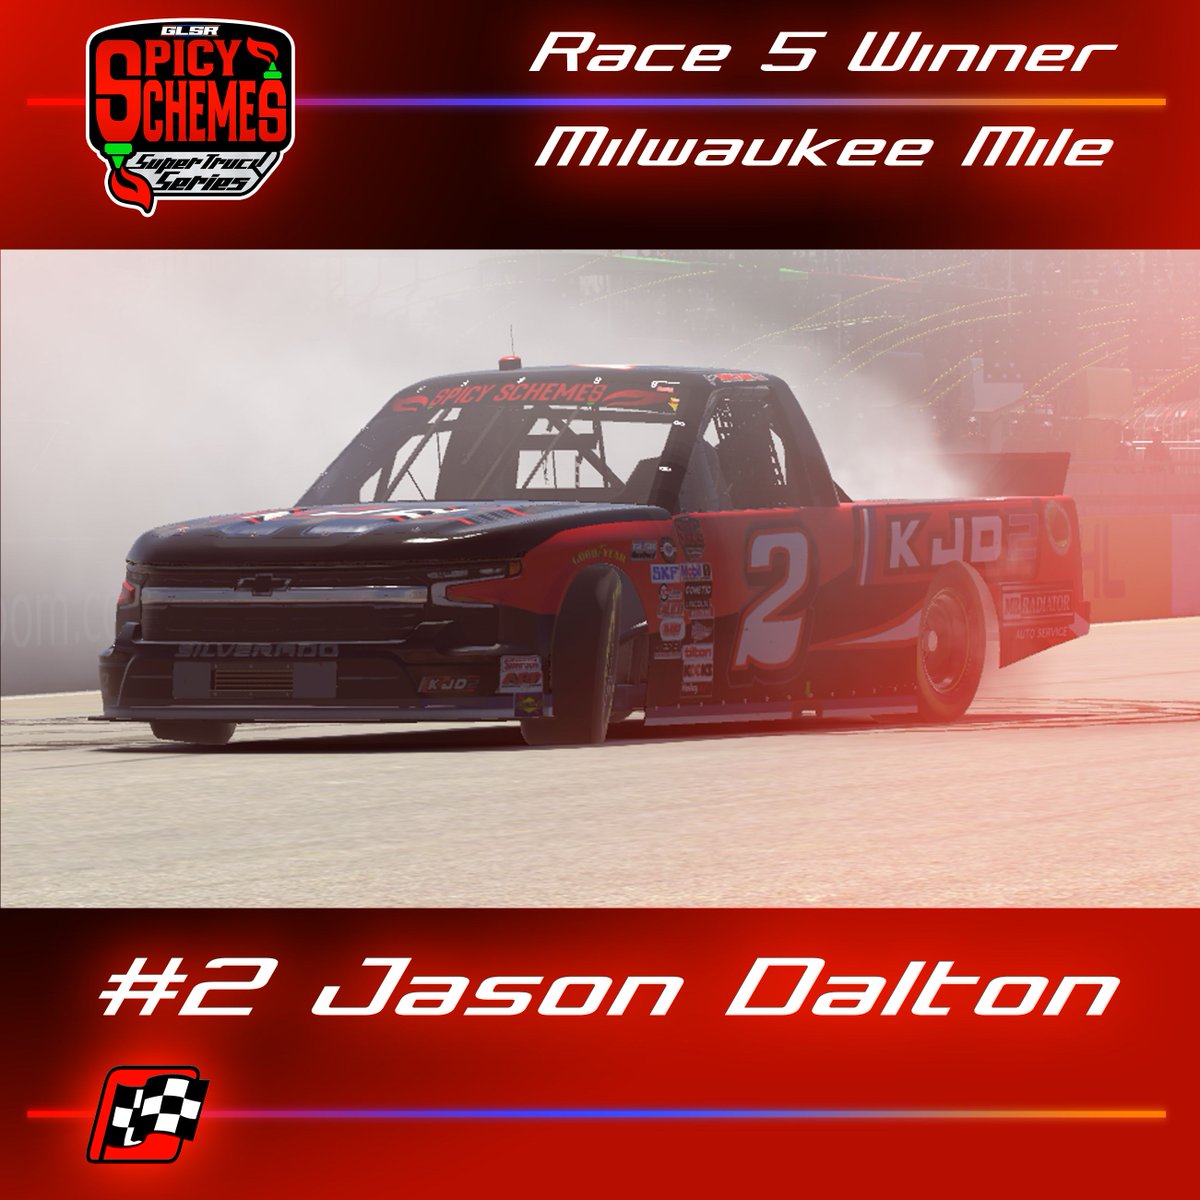 Dalton takes it home in Milwaukee! Solid battle up front between the #2 and #79 last night! While Dalton takes home the win Gagnon led the most laps securing the all important bonus point in the championship battle. Catch the replay on Extreme Sim TV!

#simracing #trucks #enascar